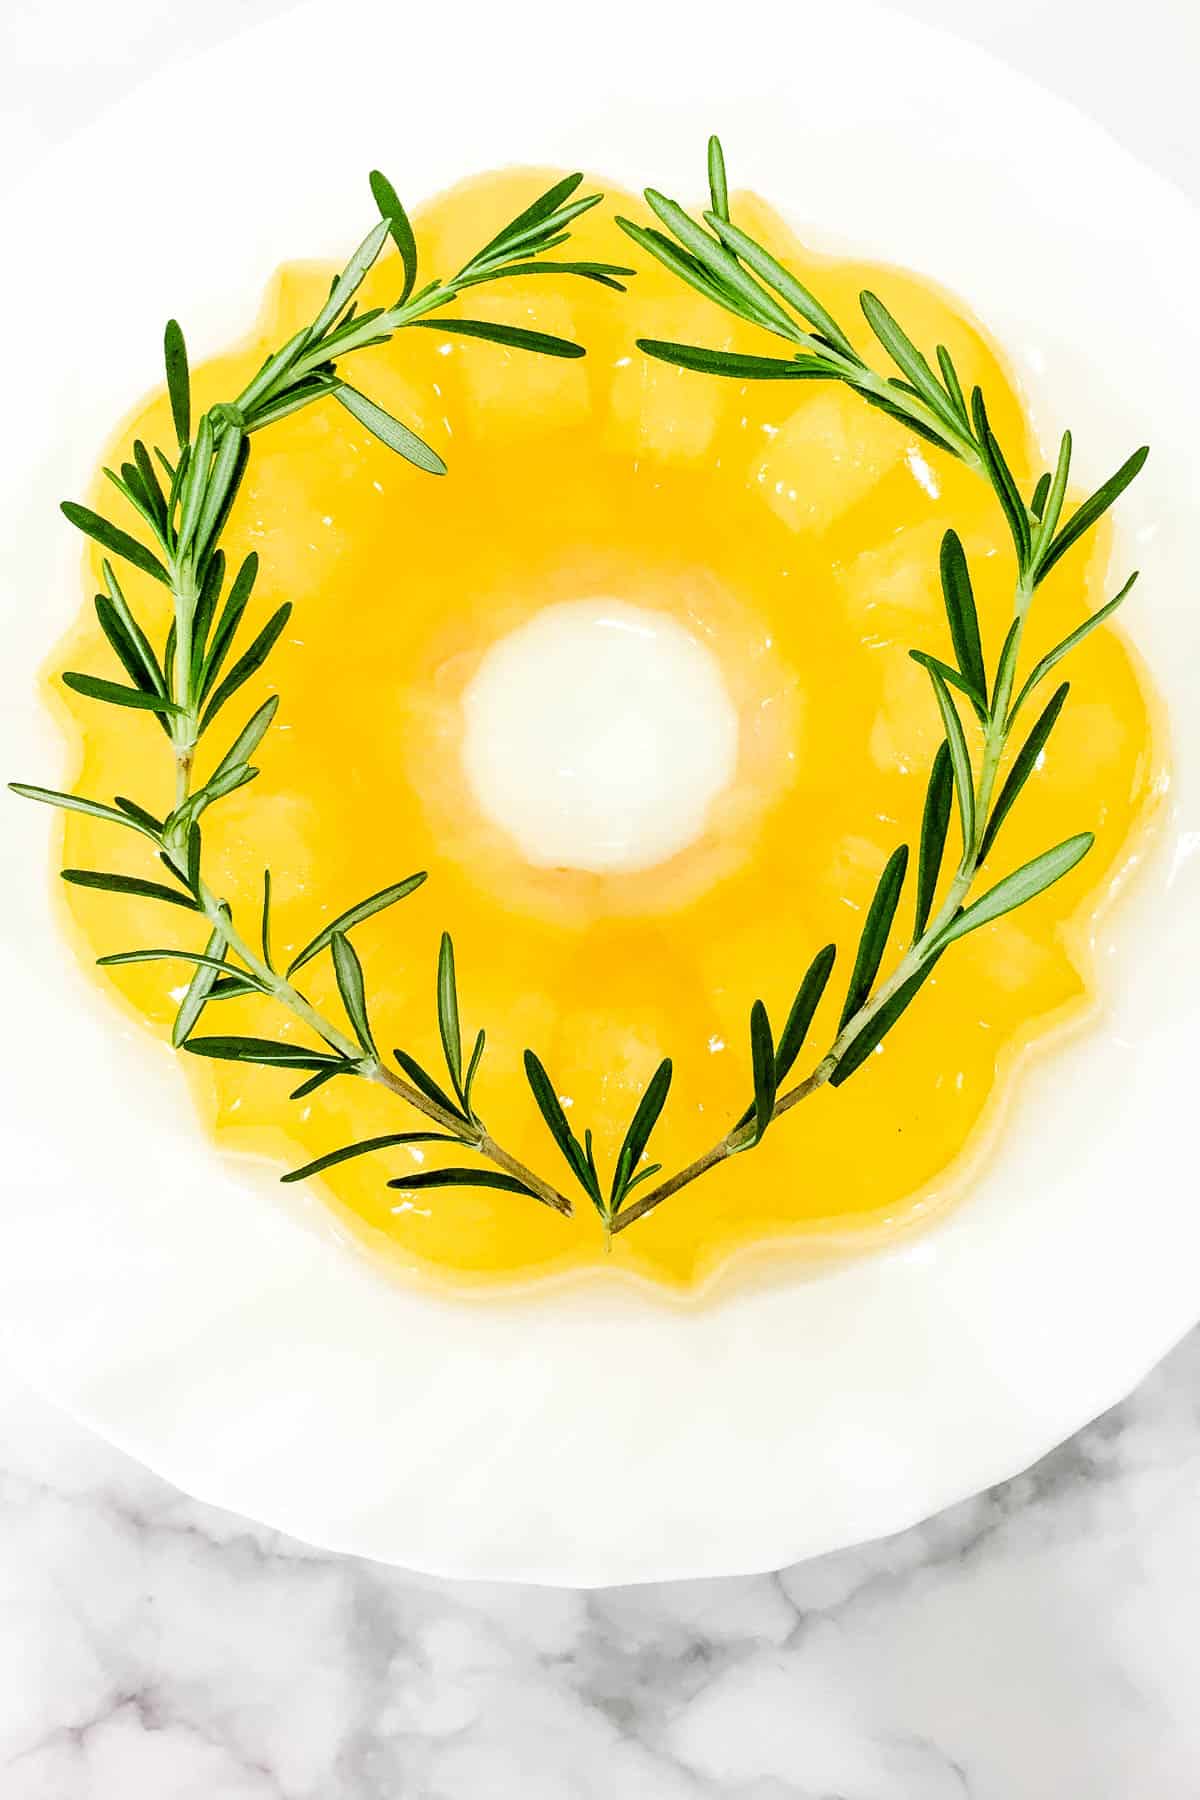 Yellow jelly on a white plate.